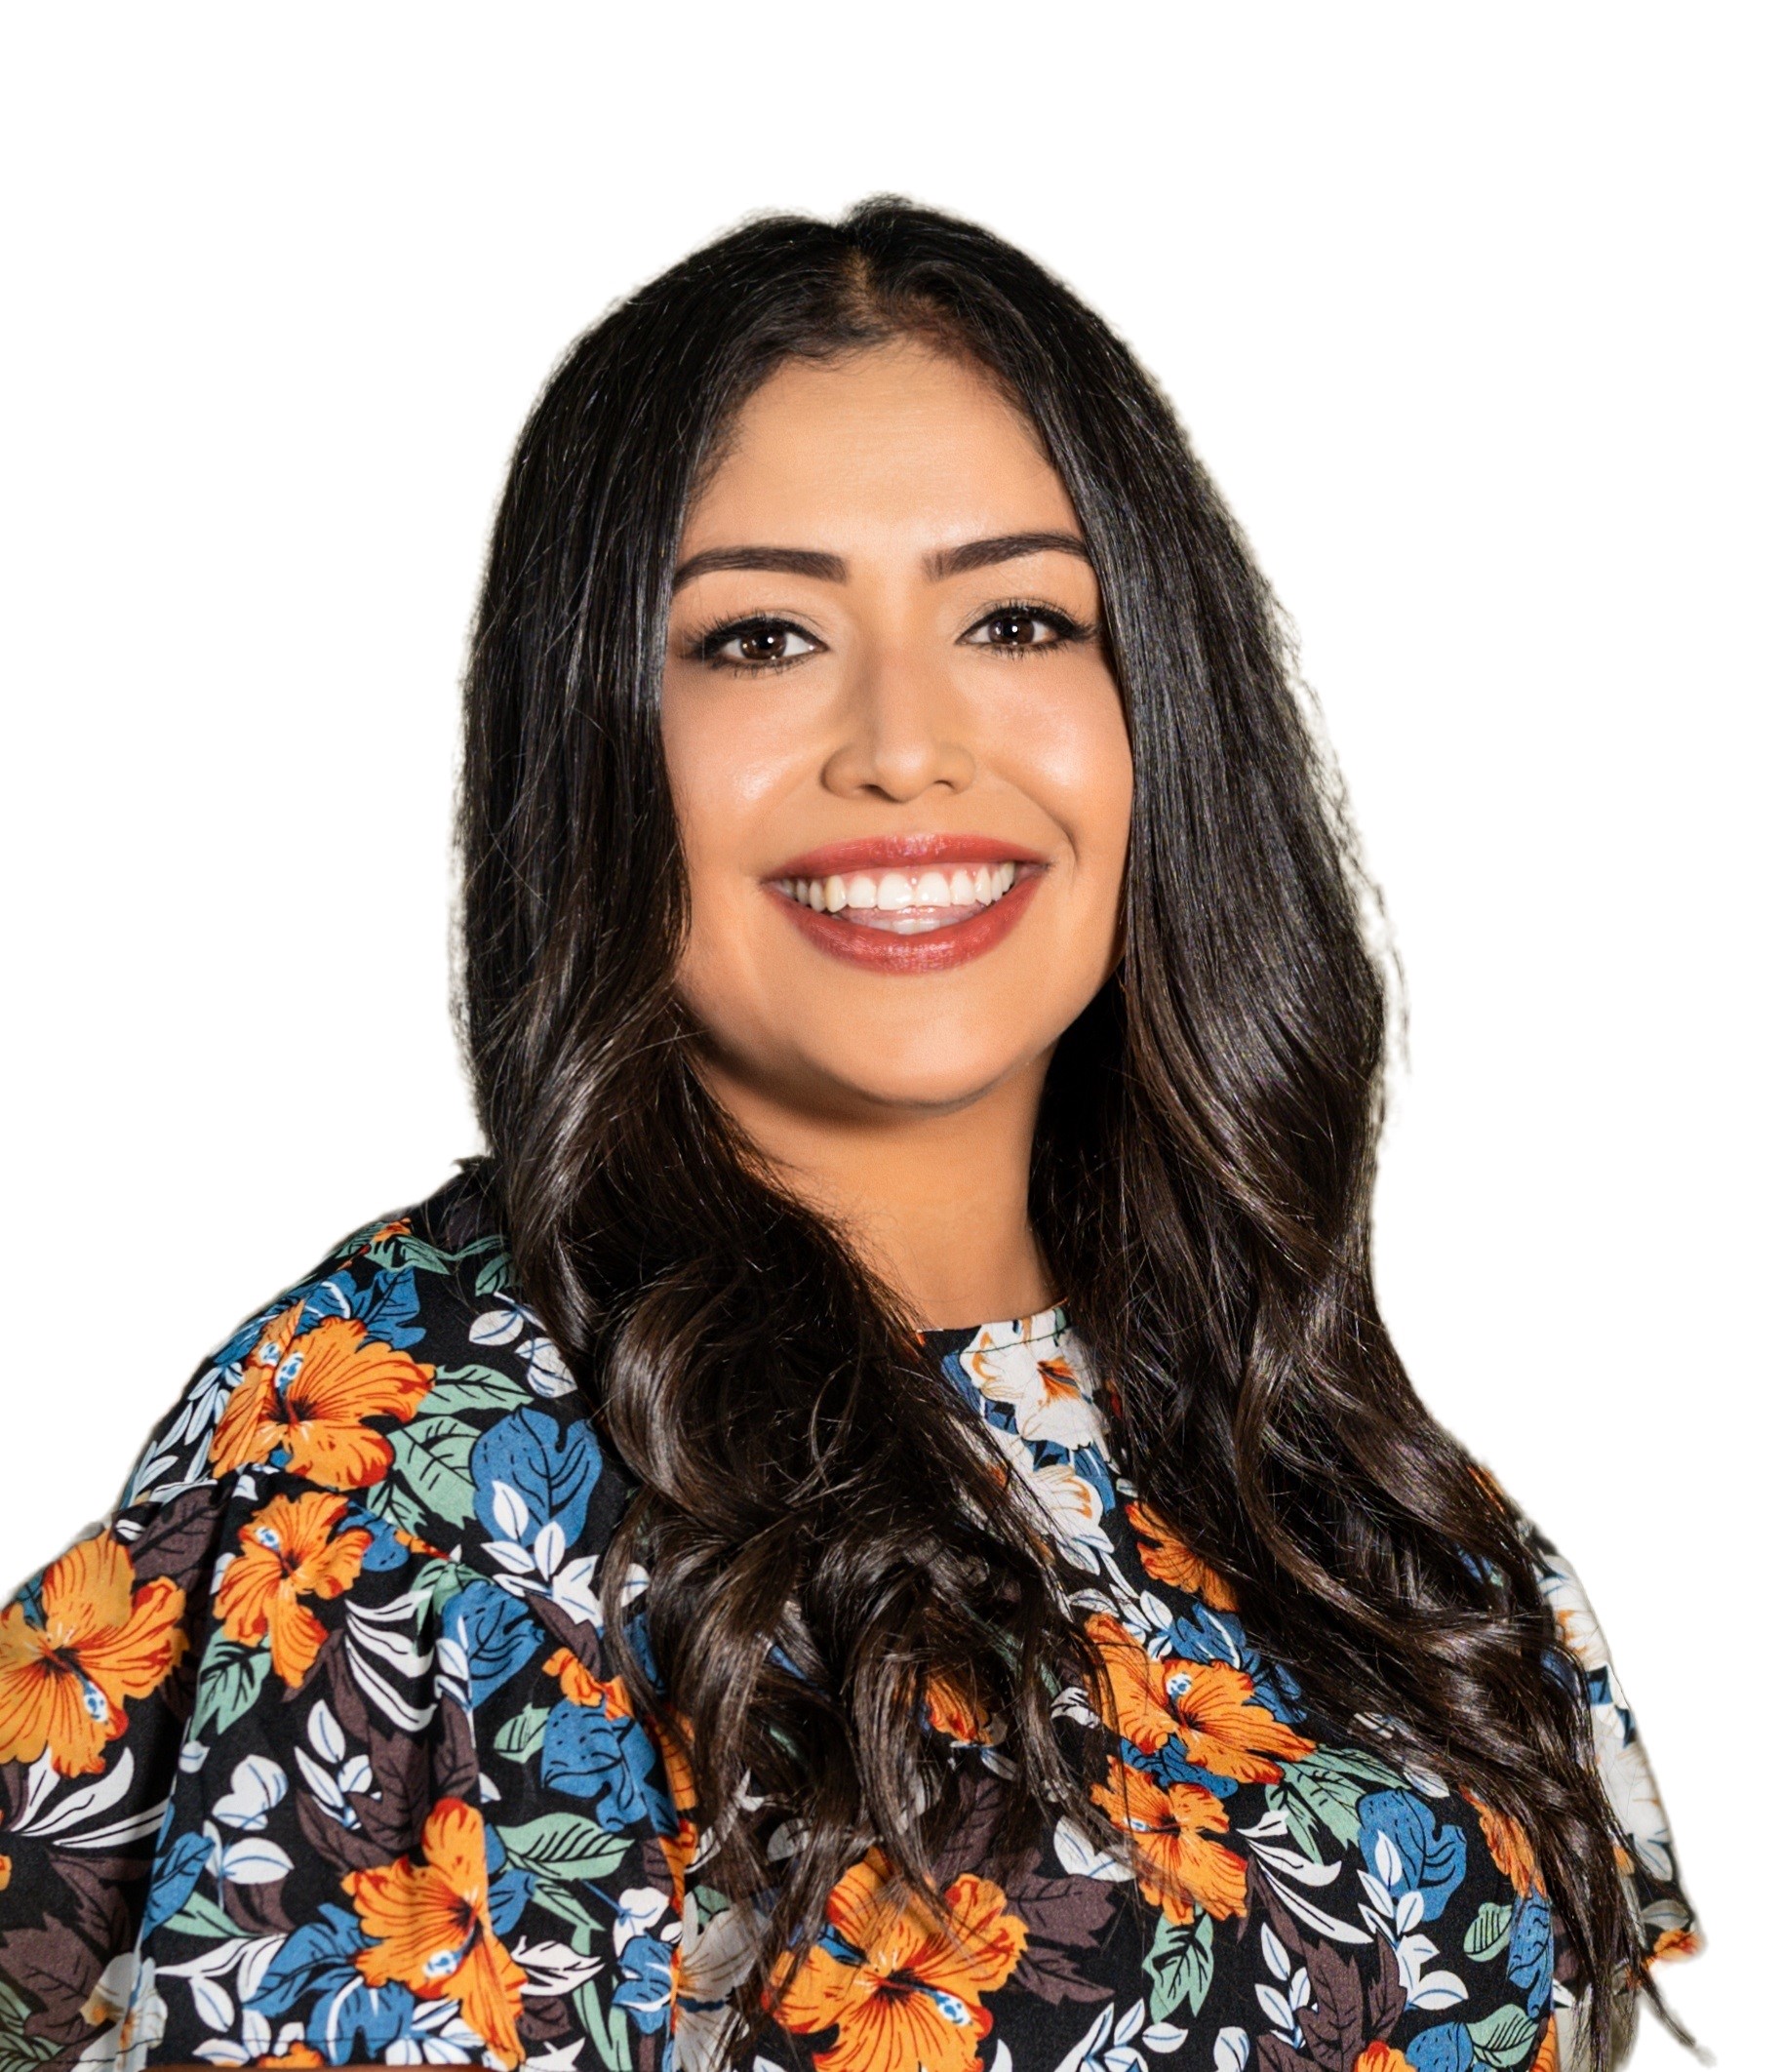 Belgica has worked with students and parents in City Heights schools for over 13 years. She is currently a School Counselor at Horace Mann Middle School. She joined the Aaron Price Fellows Program in 2019.